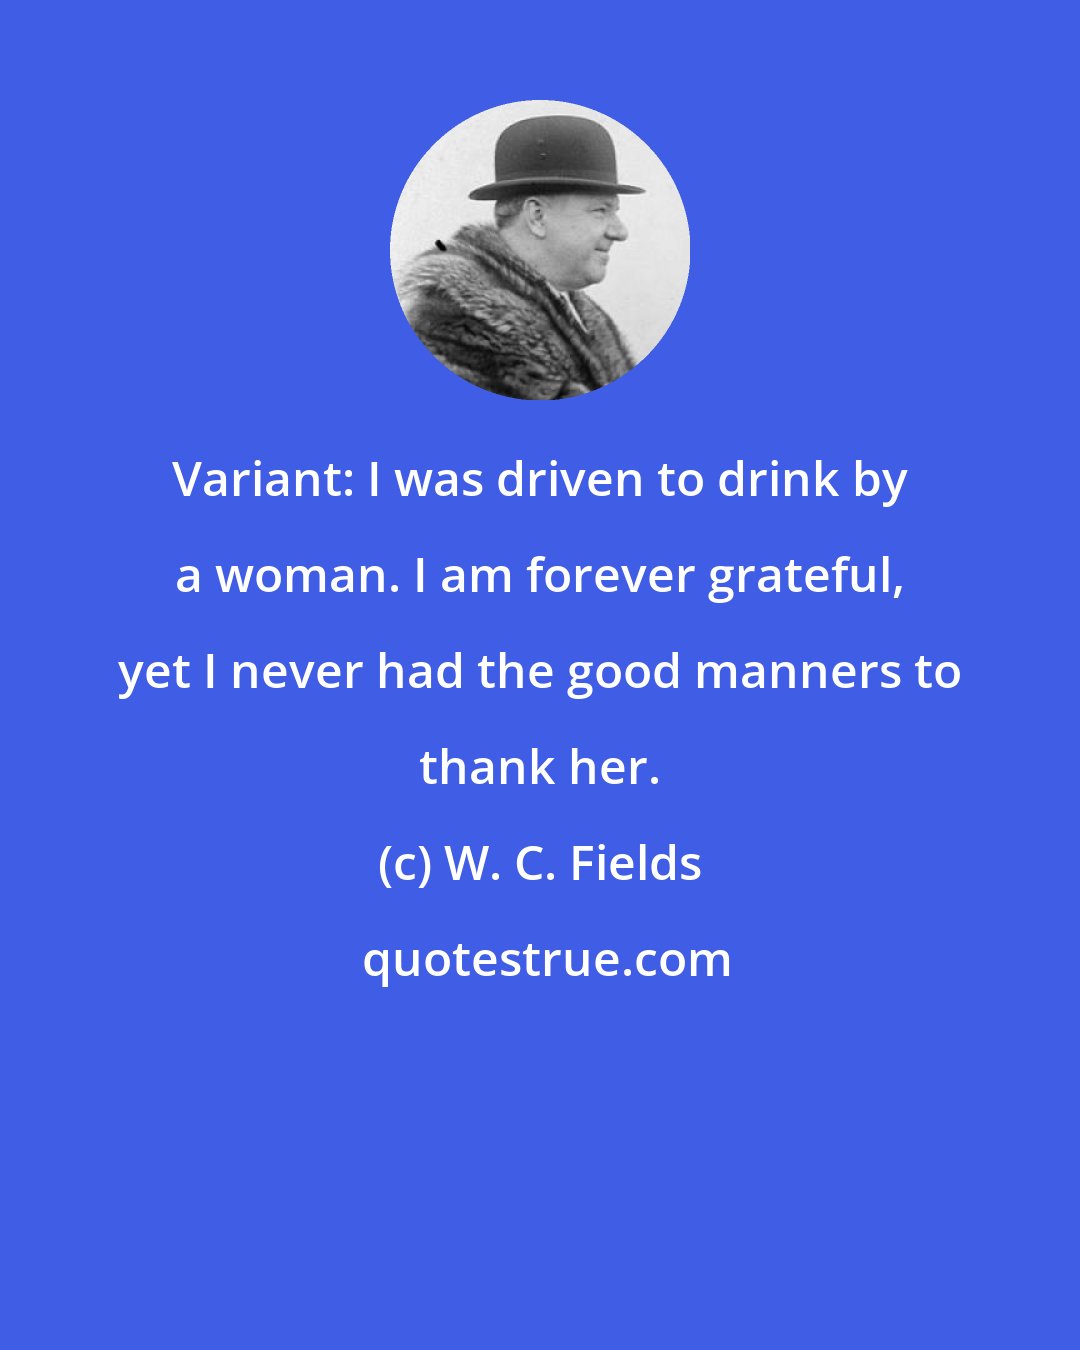 W. C. Fields: Variant: I was driven to drink by a woman. I am forever grateful, yet I never had the good manners to thank her.